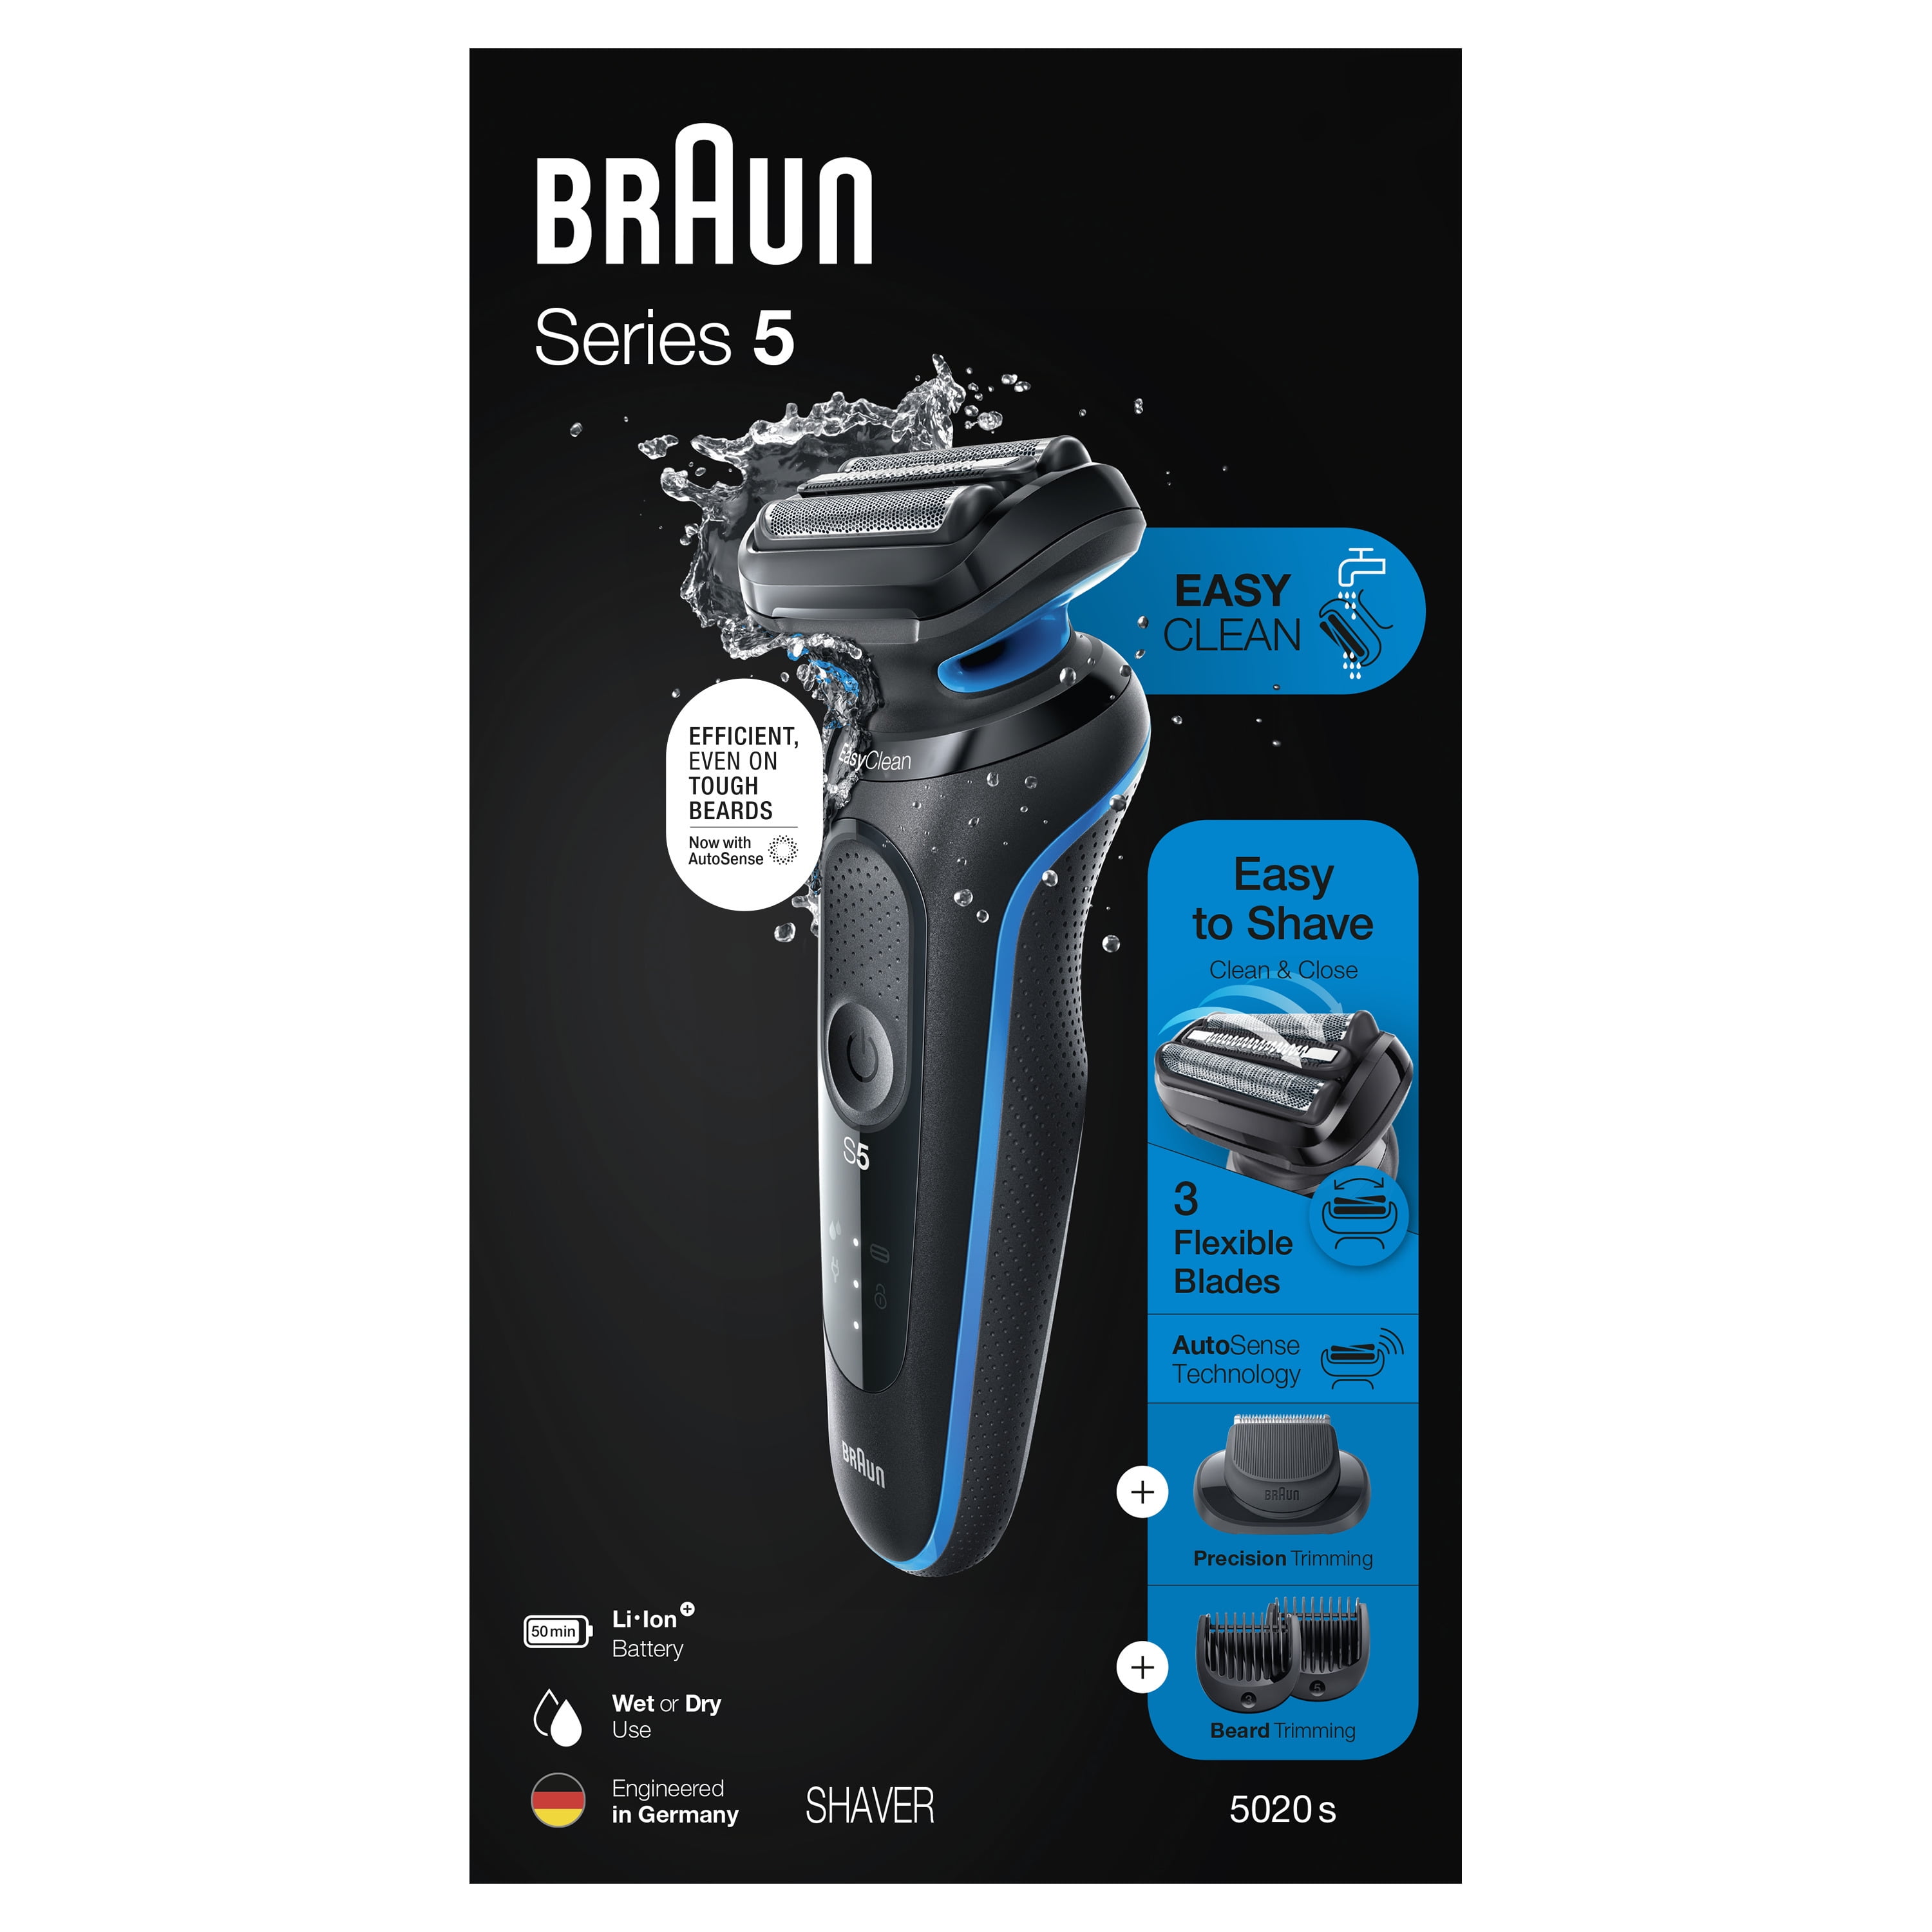 skjorte Holde Forvirret Braun Series 5 5020s Electric Shaver with Beard Trimmer for Men, Wet & Dry,  Rechargeable, Blue - Walmart.com